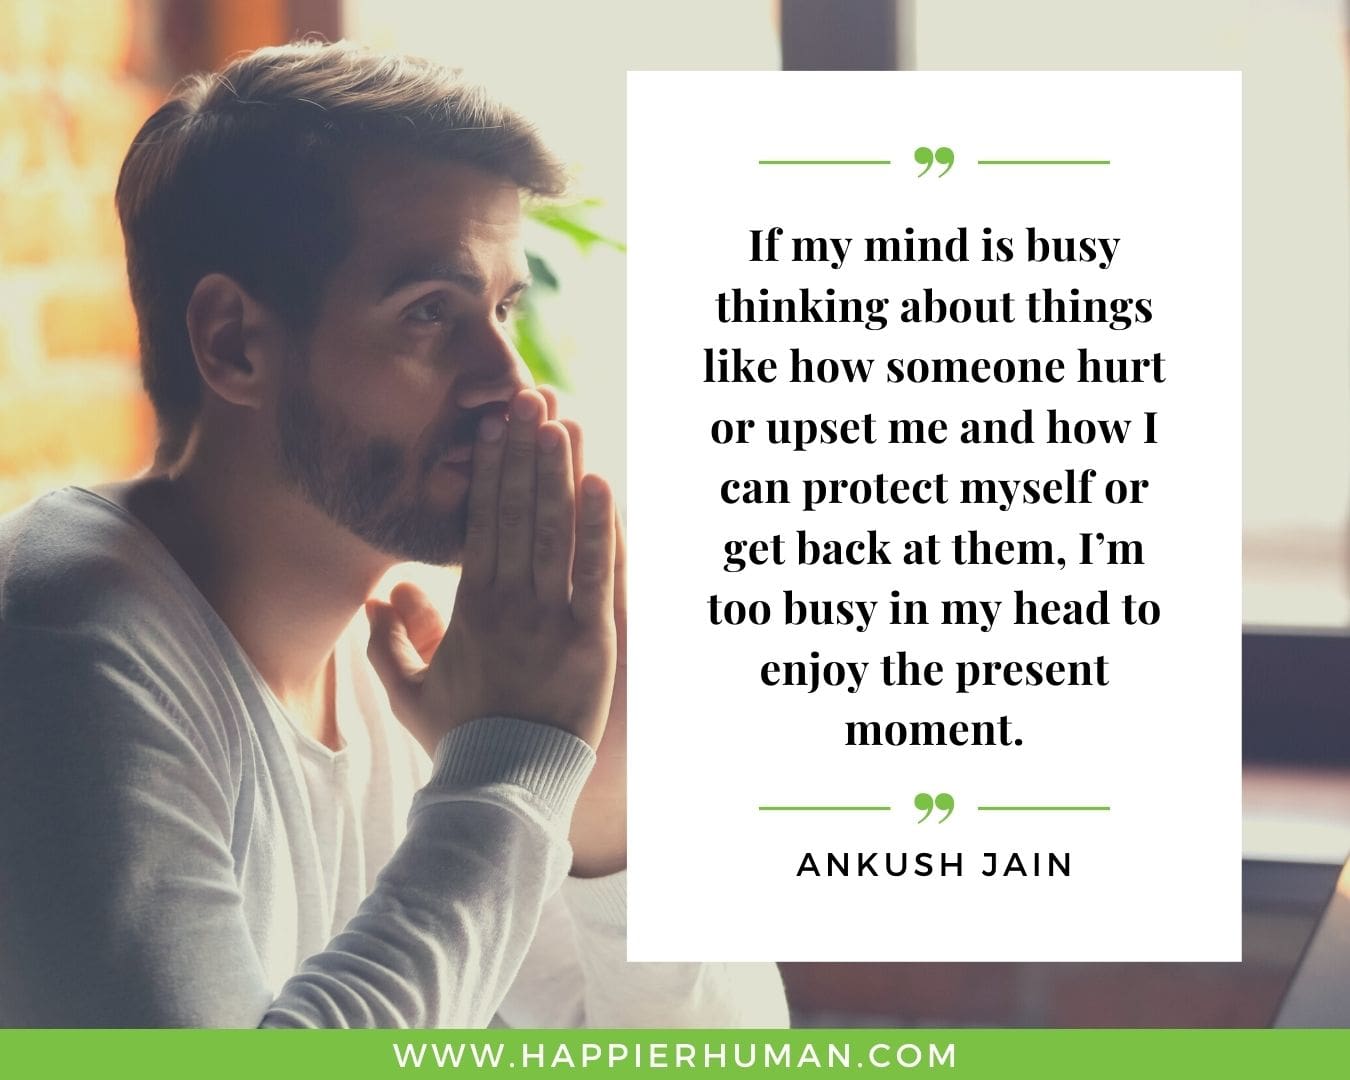 Overthinking Quotes - “If my mind is busy thinking about things like how someone hurt or upset me and how I can protect myself or get back at them, I’m too busy in my head to enjoy the present moment.” - Ankush Jain